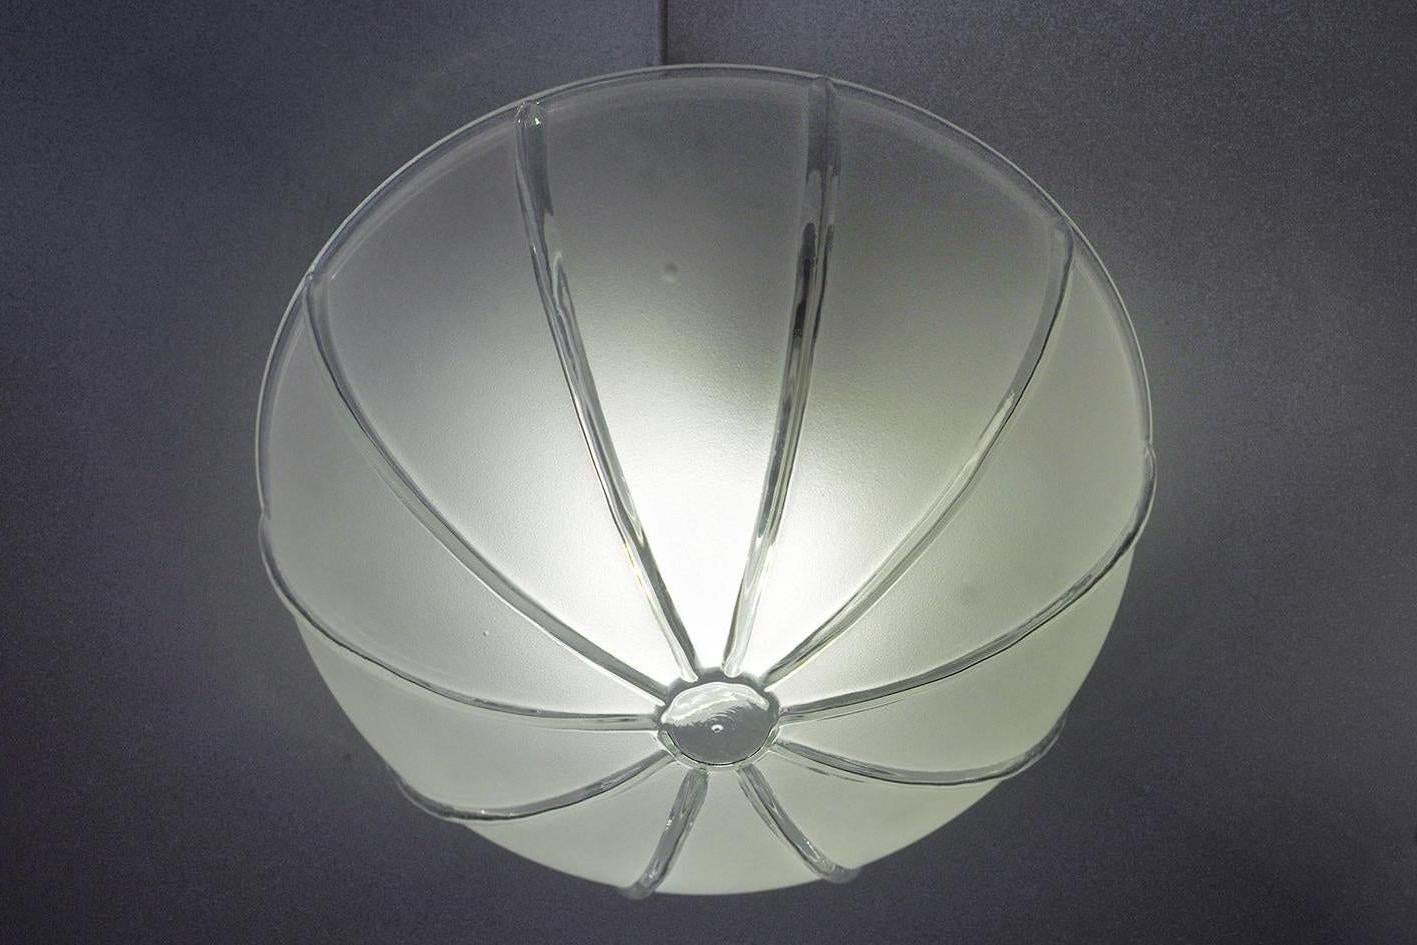 Pair of German Vintage Glass Wall Ceiling Lights Flushmounts, 1970s In Good Condition For Sale In Berlin, DE